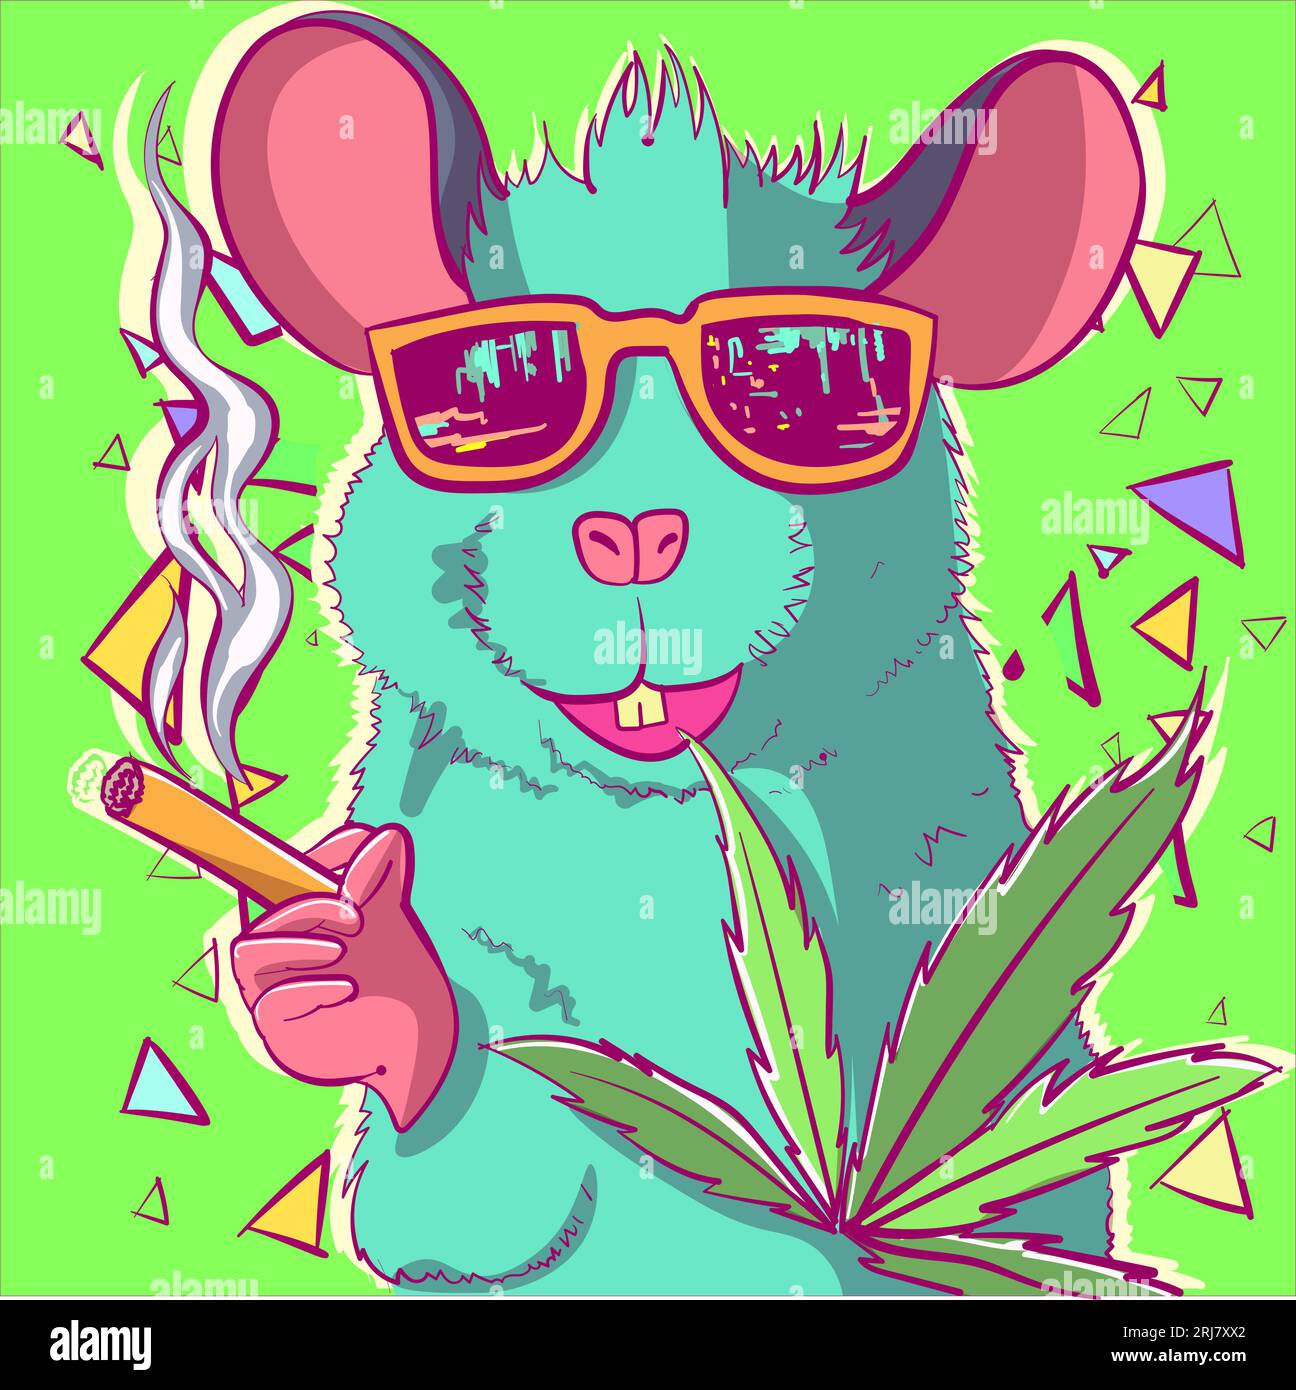 stoner-rat-with-a-pair-of-sunglasses-and-a-joint-in-his-hand-smoking-mouse-mascot-with-cannabis-leaves-being-high-2RJ7XX2.jpg